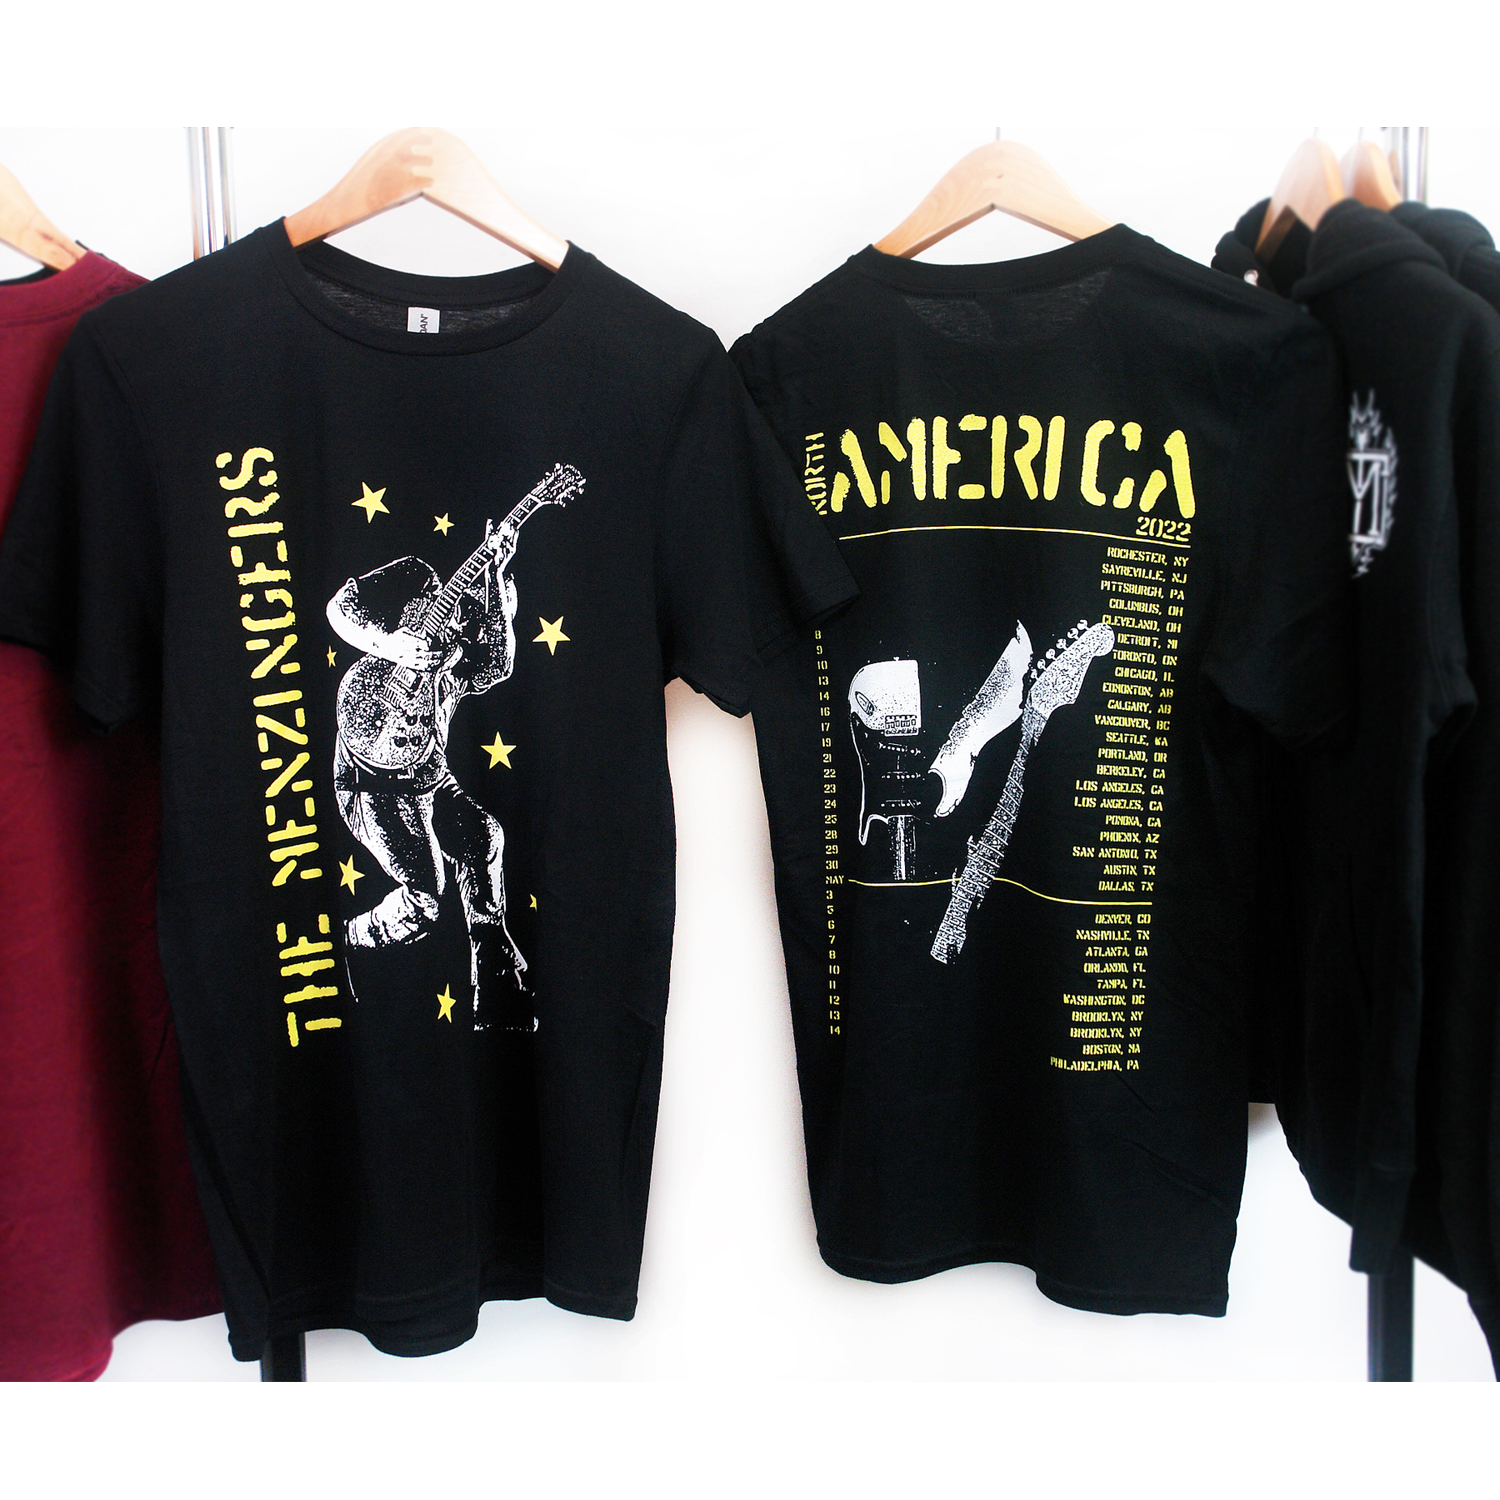 image of the front and back of a black tee shirt hanging on a white background. front of tee is on the left and has a full body print in yellow on the left side vertically says the menzingers with yellow stars all over and in white an image of a man playing a guitar. the back of the tee is on the right and has in yellow at the top 2022 america with the list of tour dates and locations below and a broken guitar in the center